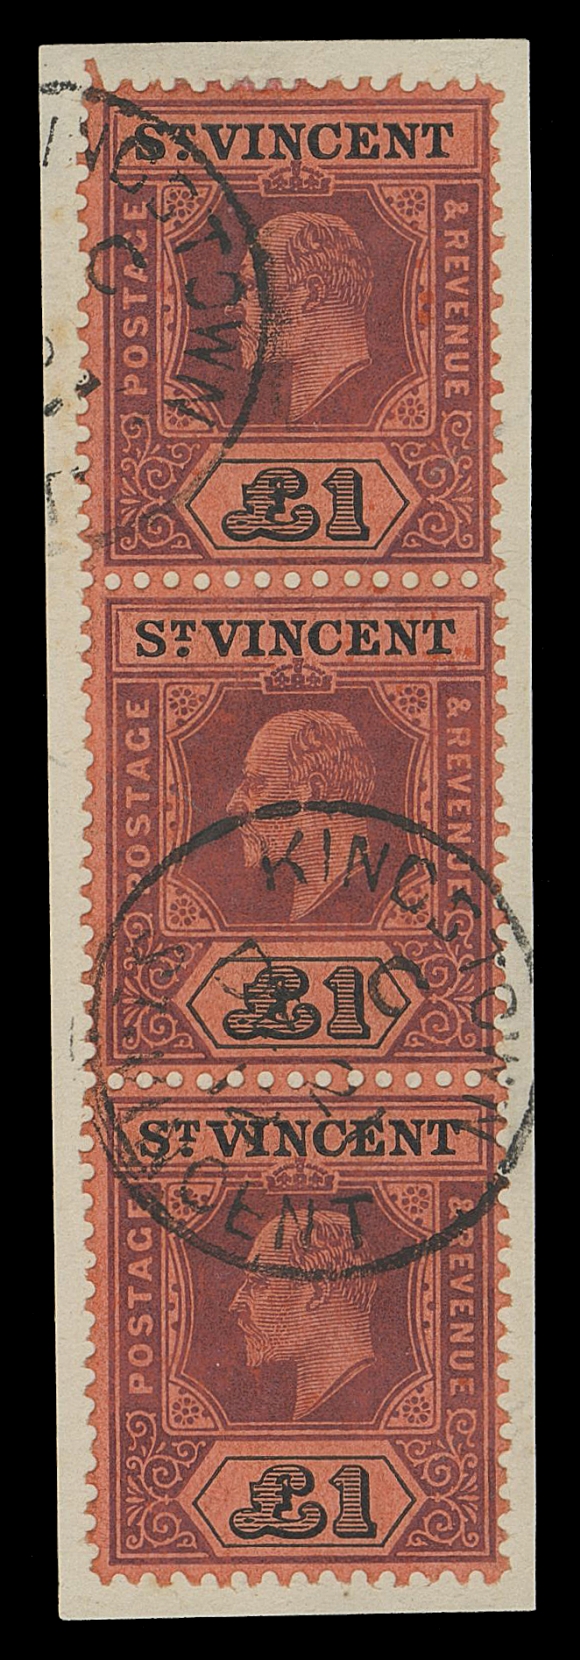 ST. VINCENT  89,An impressive used vertical strip of three with superb solid colours, sharp impression and in flawless condition, neatly tied to small piece by Kingston, St. Vincent DE 21 12 postmarks; a beautiful and very seldom seen used multiple in selected quality, VF+ (SG 93 £1,200 as used singles)